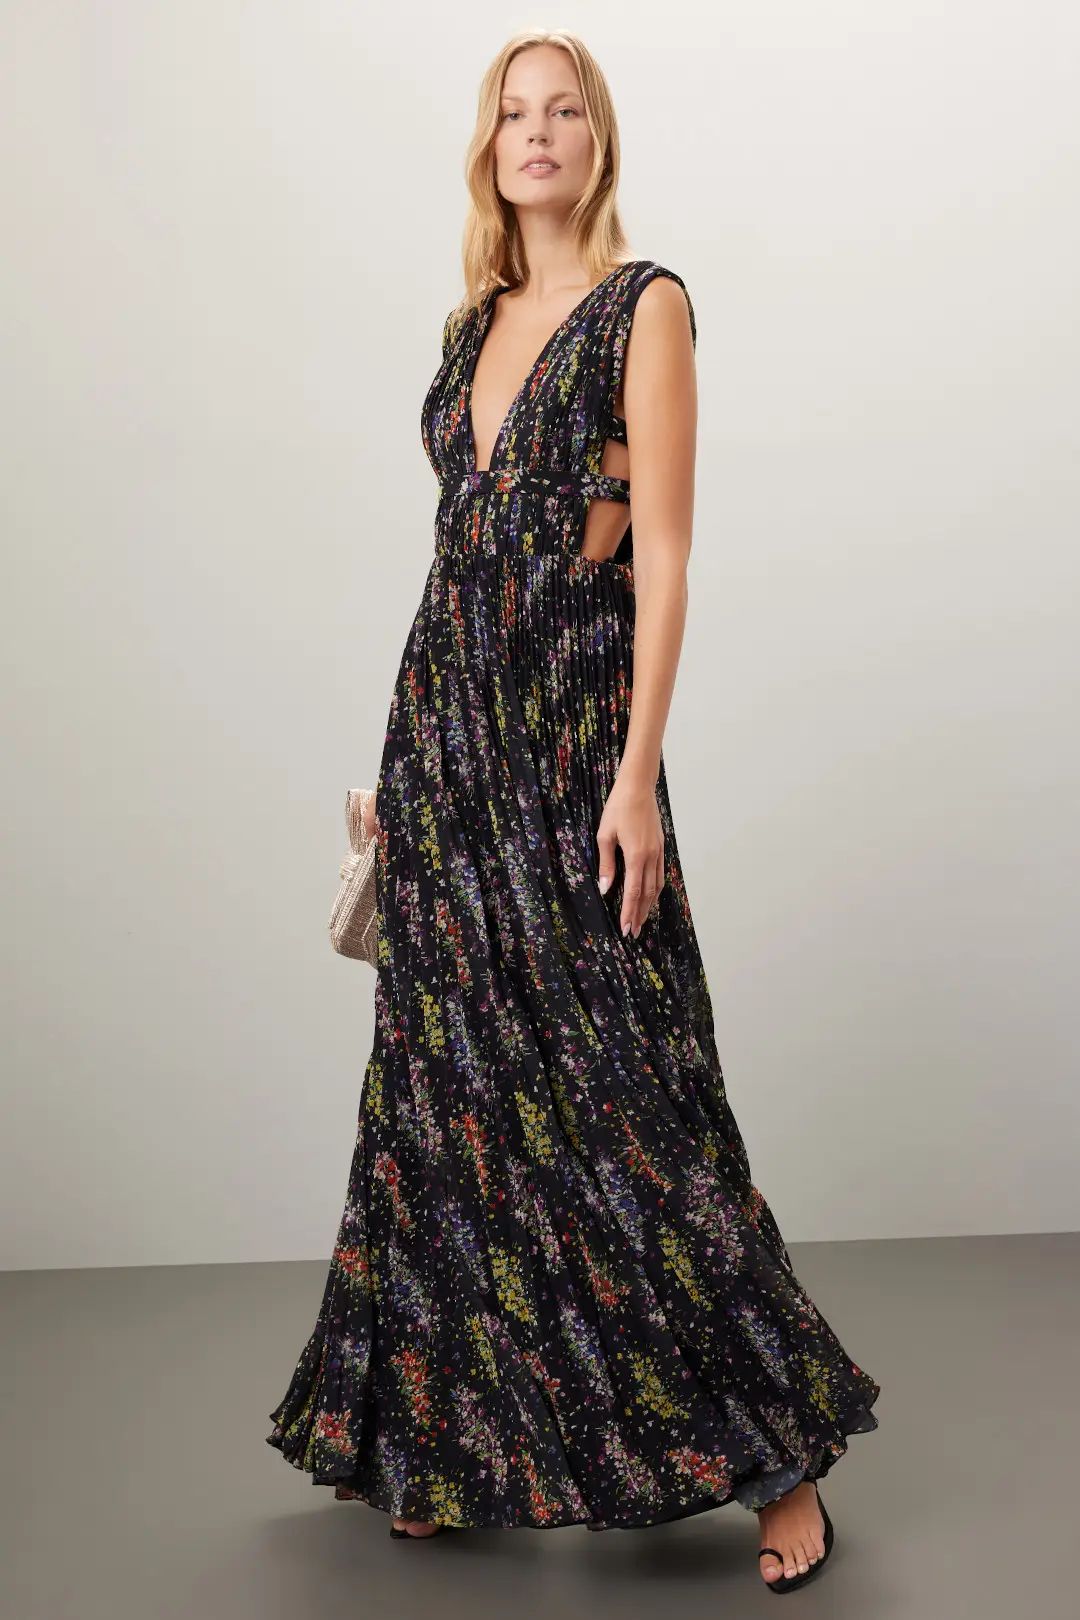 Valentino Floral Chiffon Gown | Rent the Runway